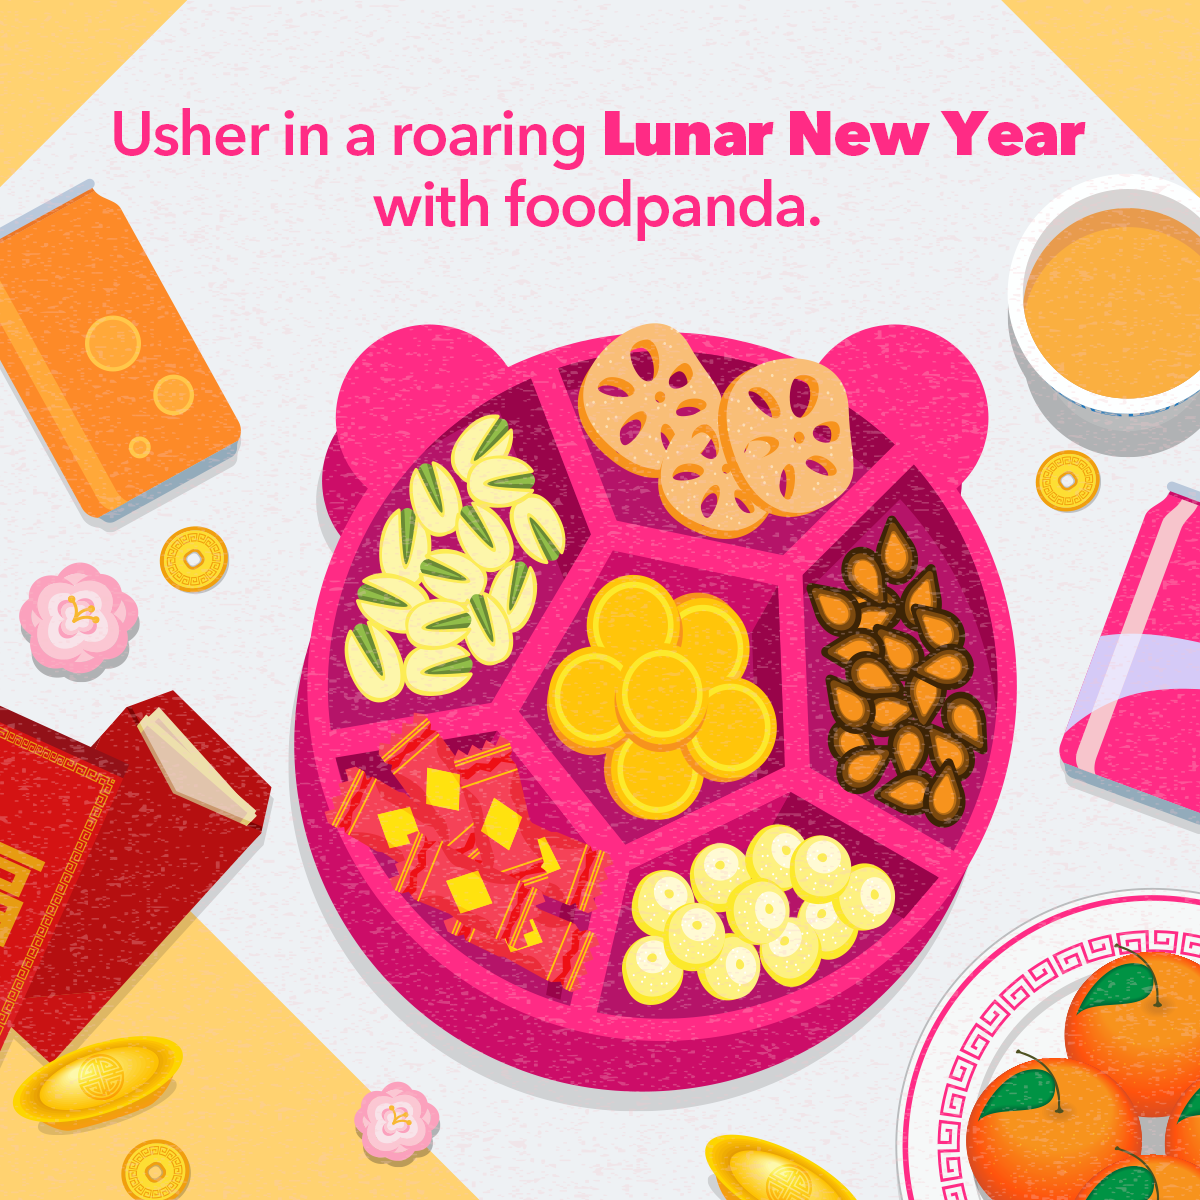 Image - 10 must-have Lunar New Year essentials on foodpanda to usher in a roaring Year of the Tiger